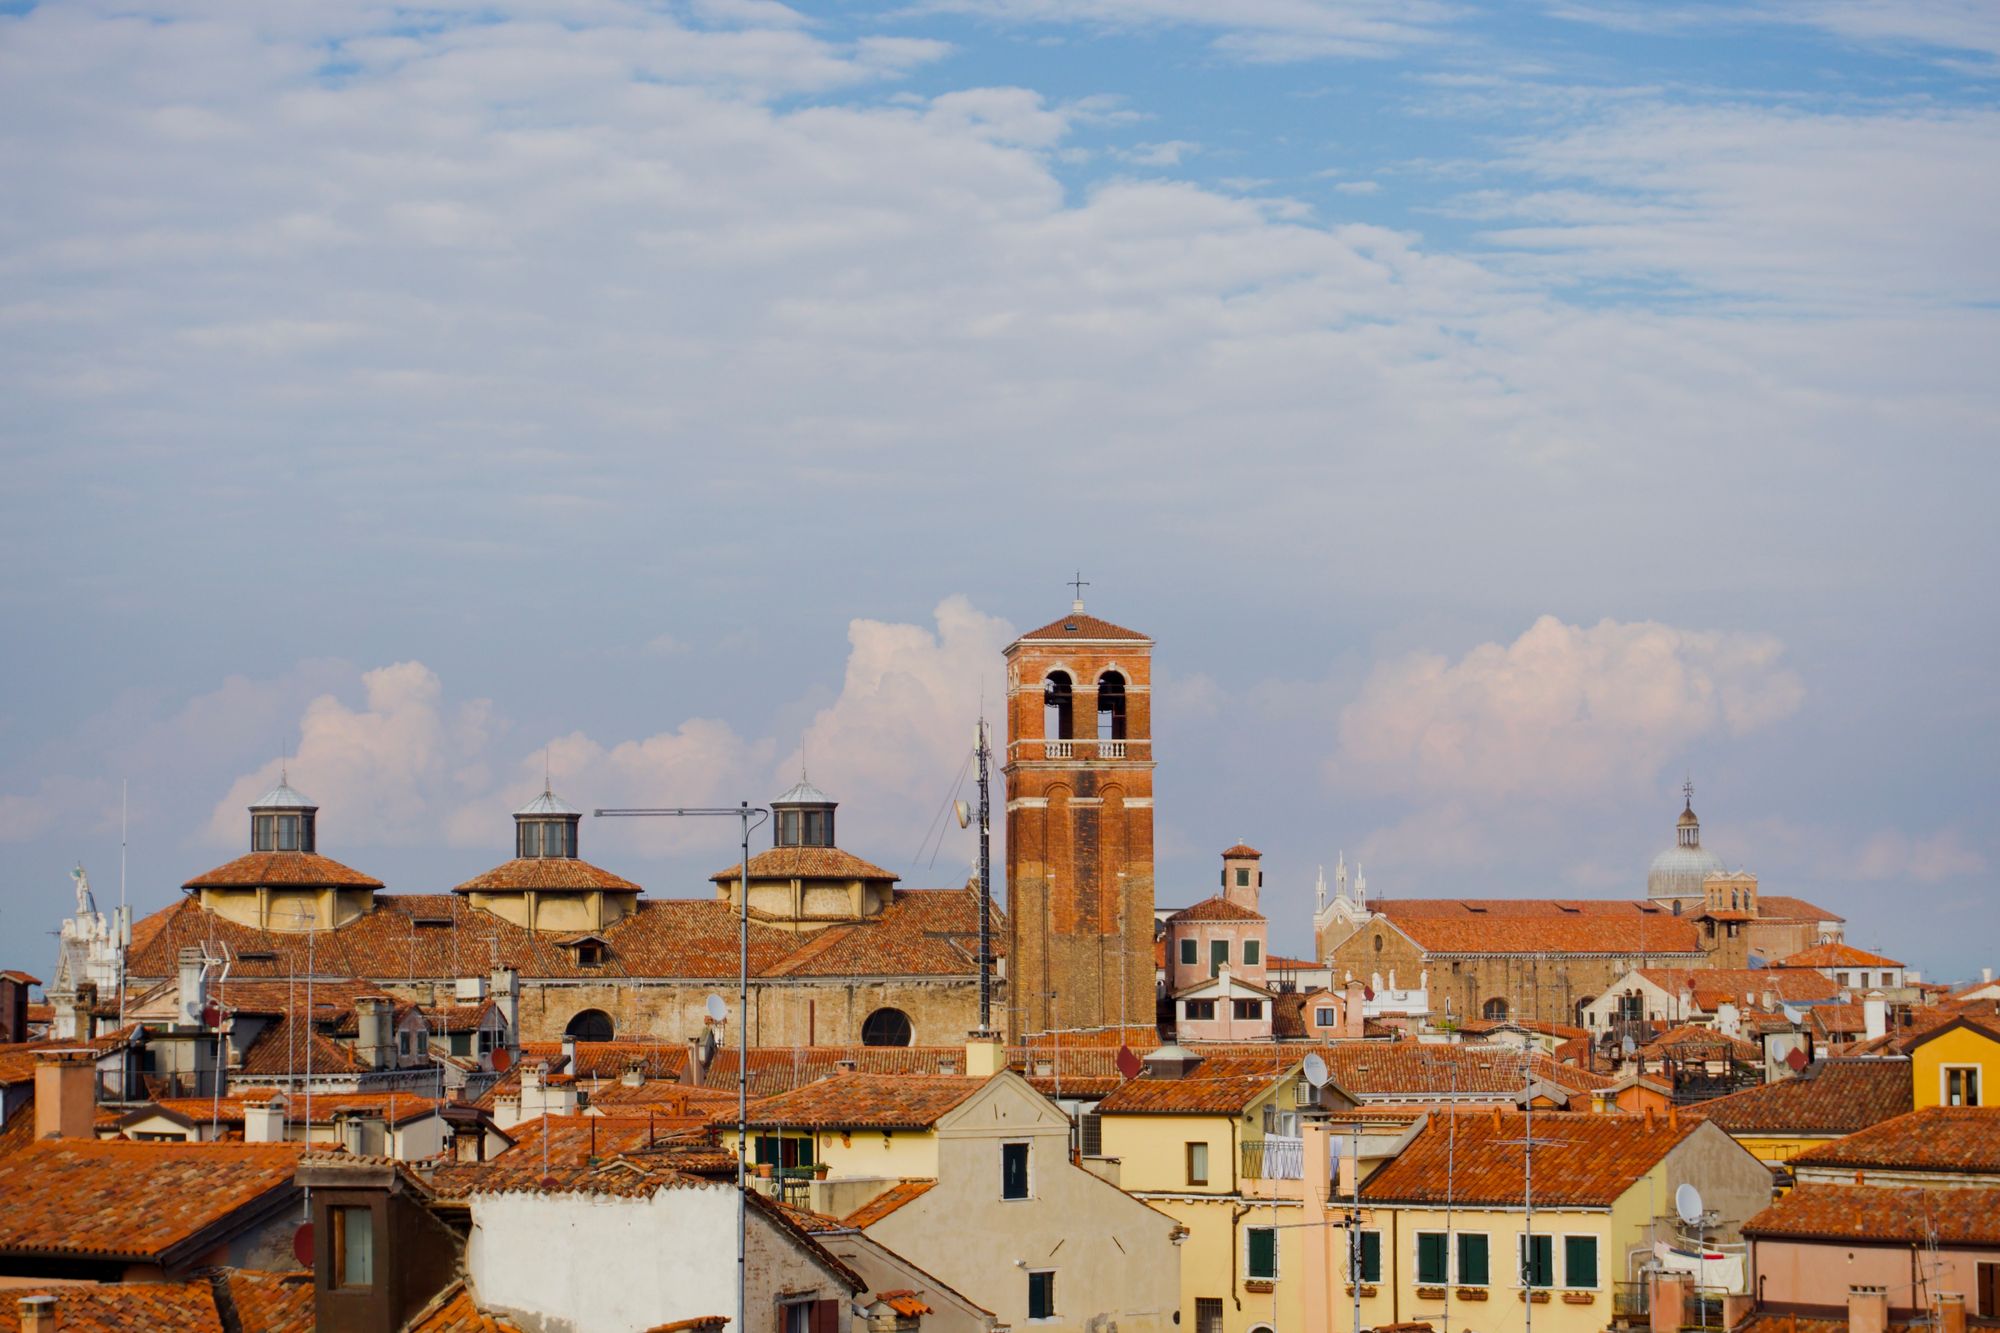 Terracotta-coloured roofs in the foreground with towering cumulus clouds rising in the background.